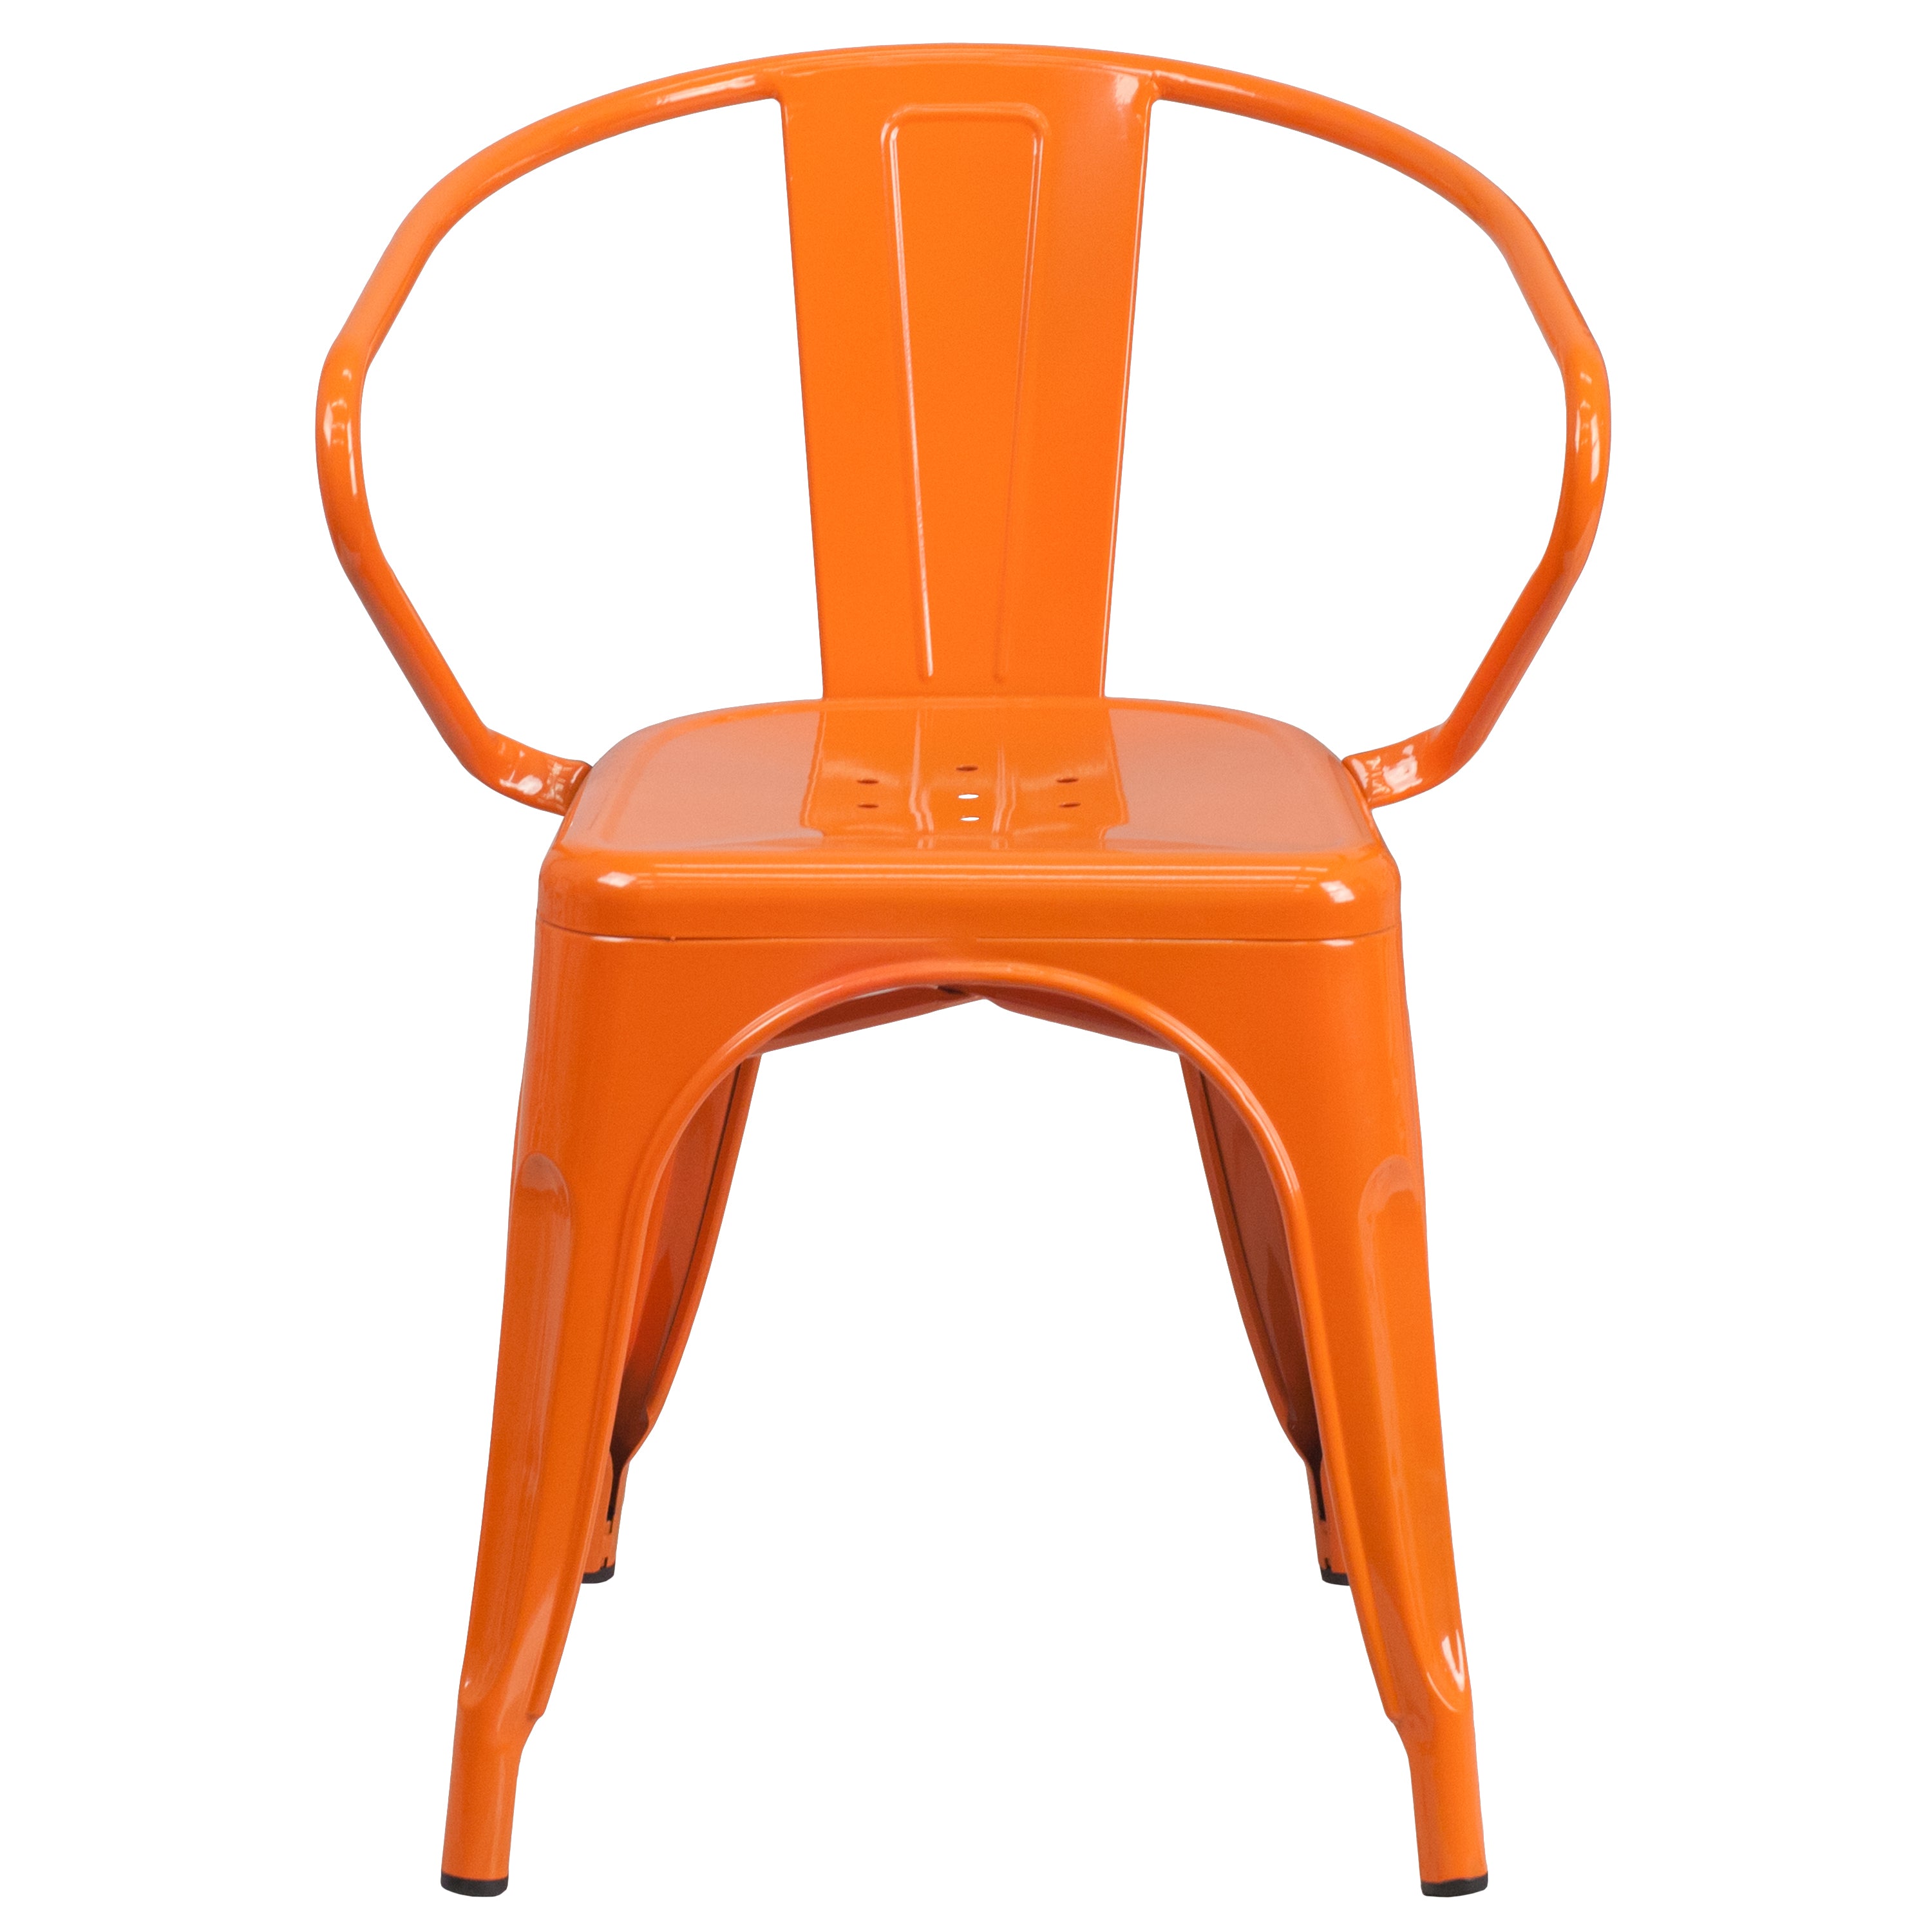 Commercial Grade Metal Indoor-Outdoor Chair with Arms-Indoor/Outdoor Chairs-Flash Furniture-Wall2Wall Furnishings